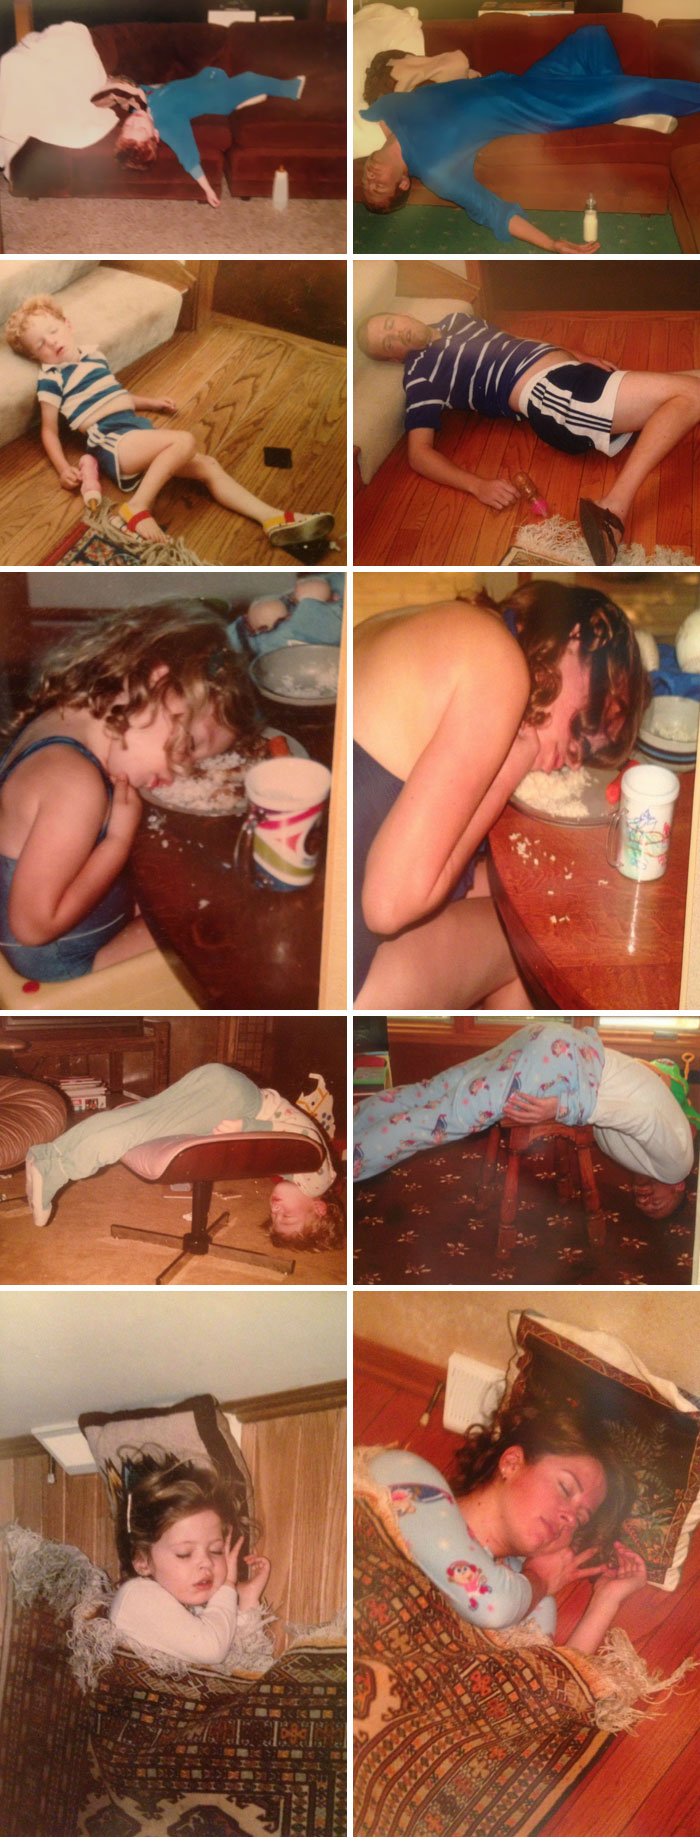 My Parents Took Pictures Of Us Asleep In Weird Positions When We Were Kids. We Recreated The Photos As Adults, But Just Look Like A Bunch Of Drunks